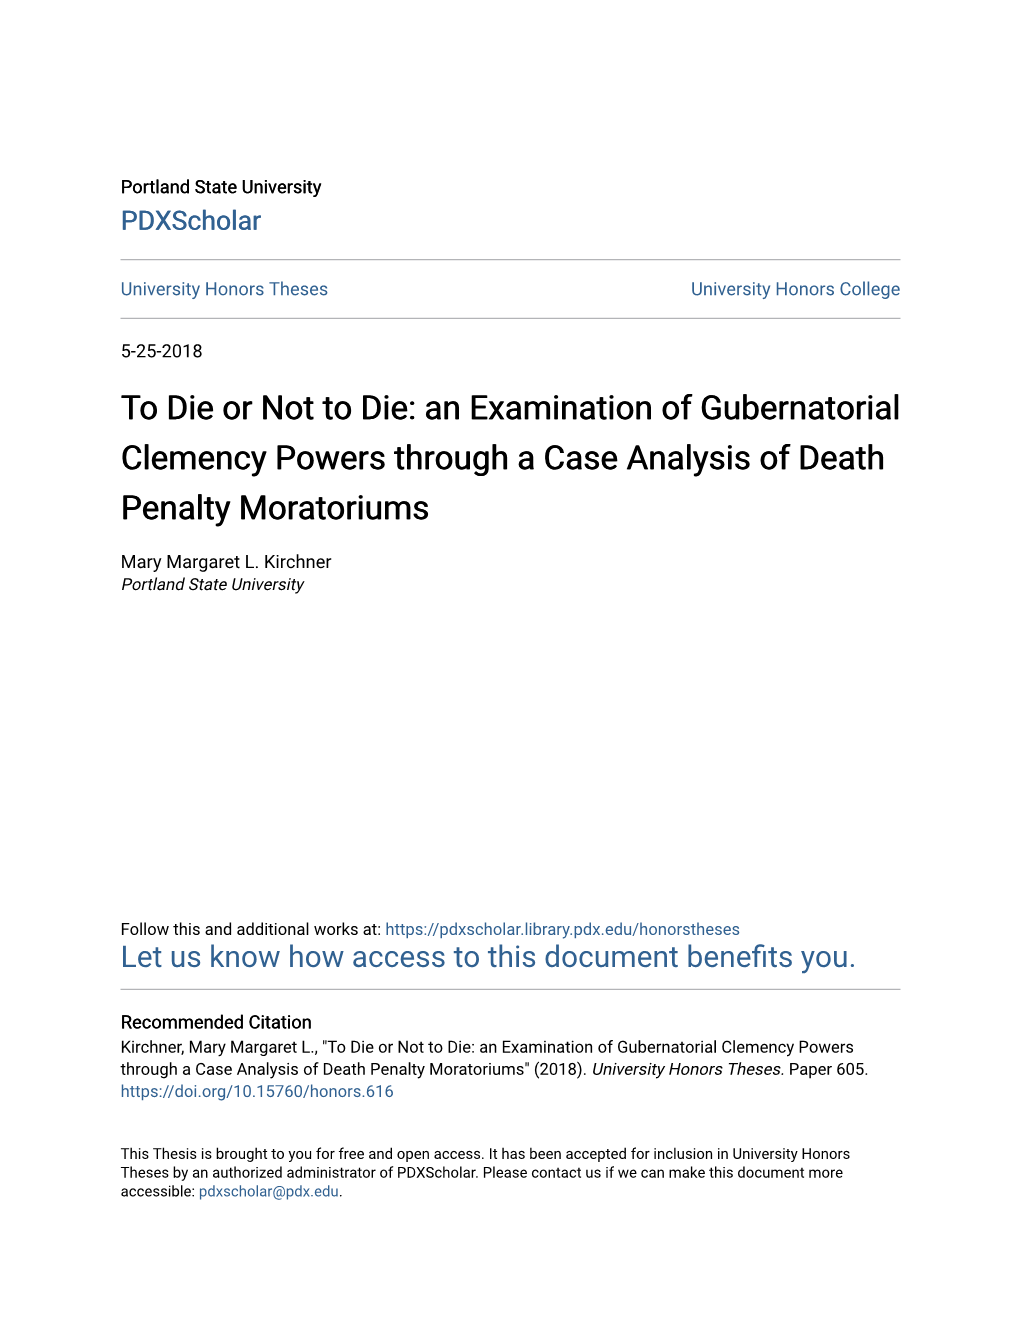 An Examination of Gubernatorial Clemency Powers Through a Case Analysis of Death Penalty Moratoriums